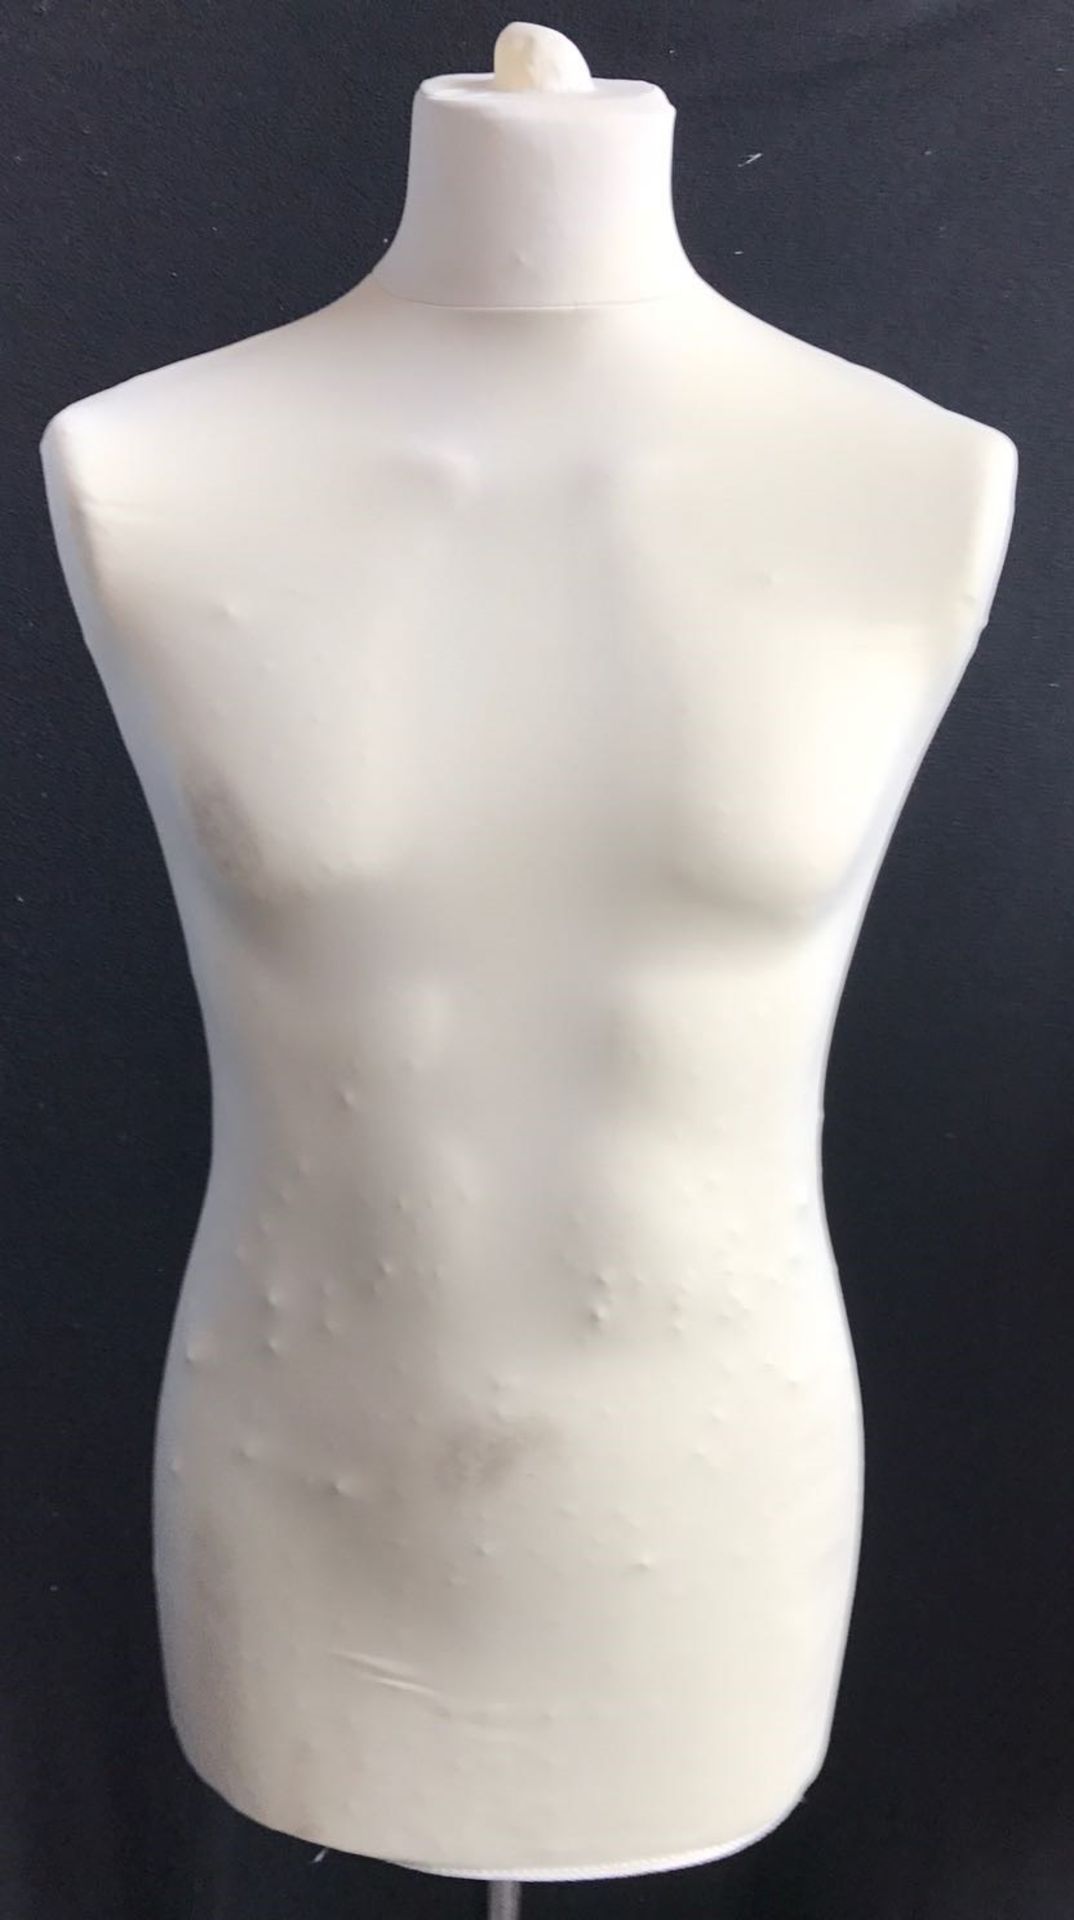 Furniture - White Mannequin Body With Metal Stand, 29x16''